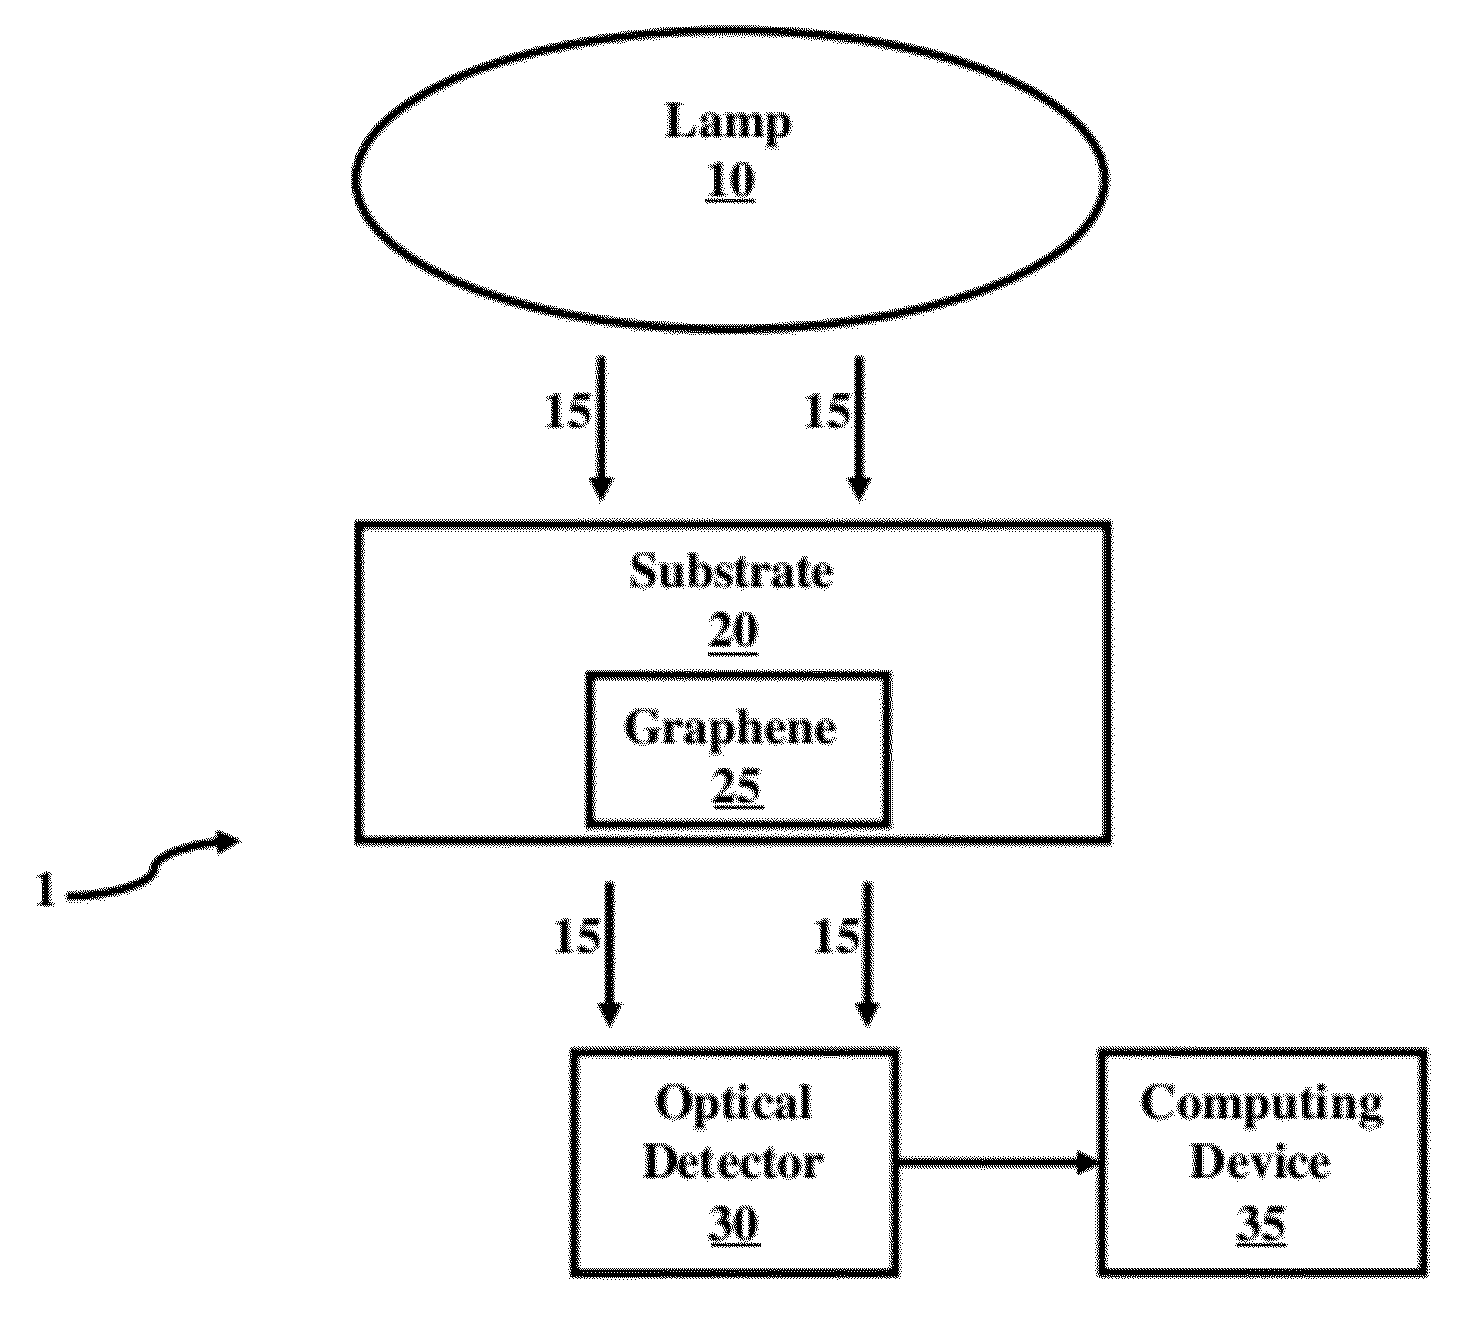 Method and System of Improved Uniformity Testing